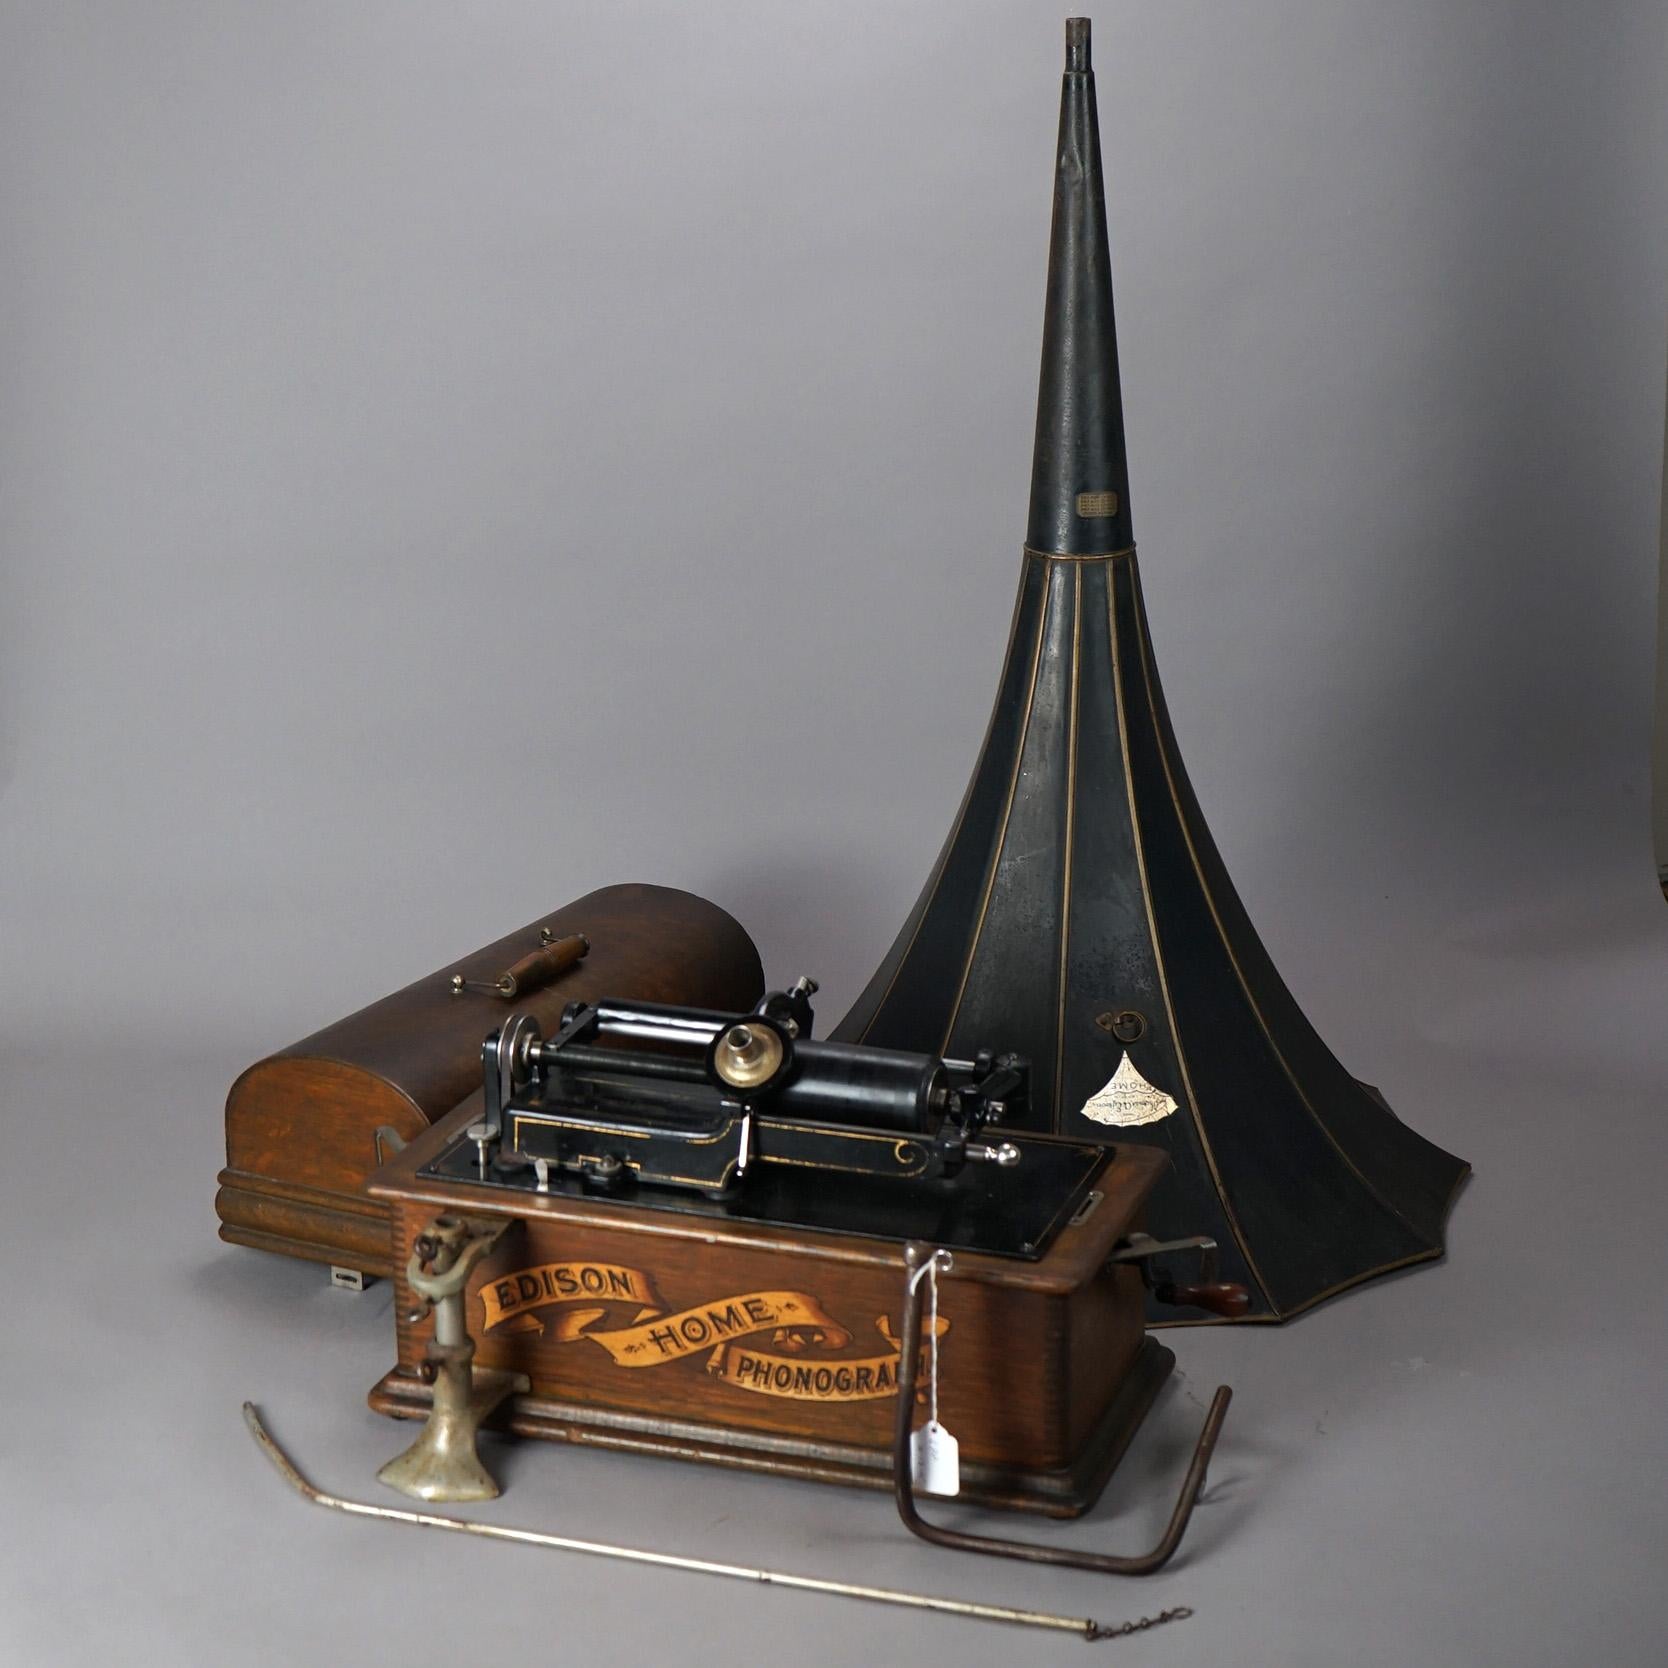 An antique Edison Home Standard Phonograph offers oak case with maker label and exterior horn, working condition (horn does not fit properly into base), c1905

Measures - 33